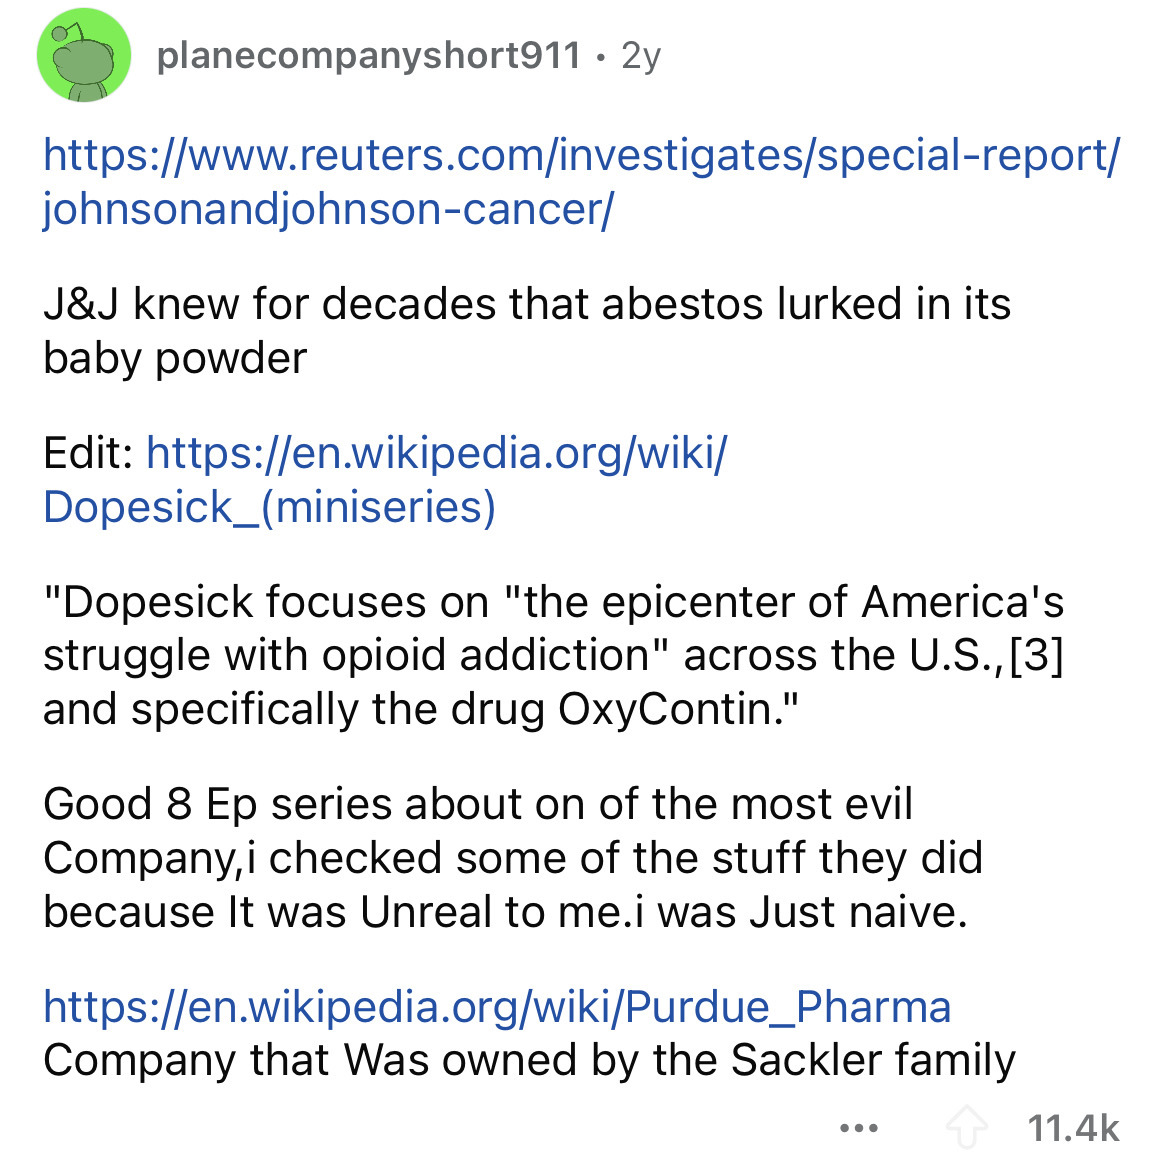 document - planecompanyshort911 2y johnsonandjohnsoncancer J&J knew for decades that abestos lurked in its baby powder Edit Dopesick miniseries "Dopesick focuses on "the epicenter of America's struggle with opioid addiction" across the U.S., 3 and specifi